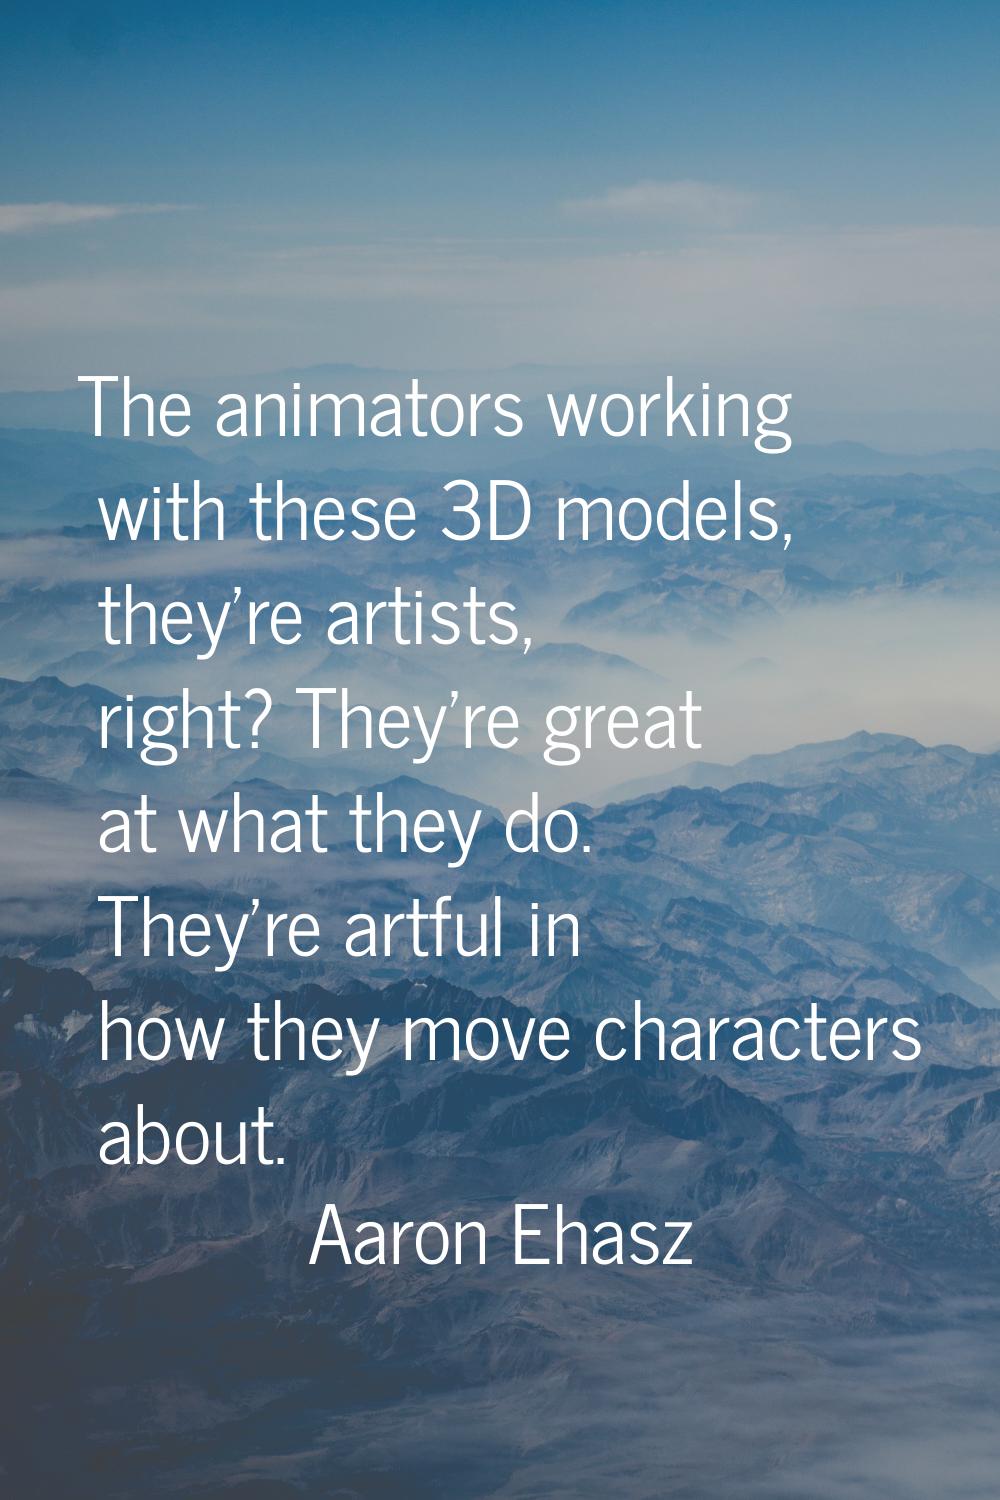 The animators working with these 3D models, they're artists, right? They're great at what they do. 